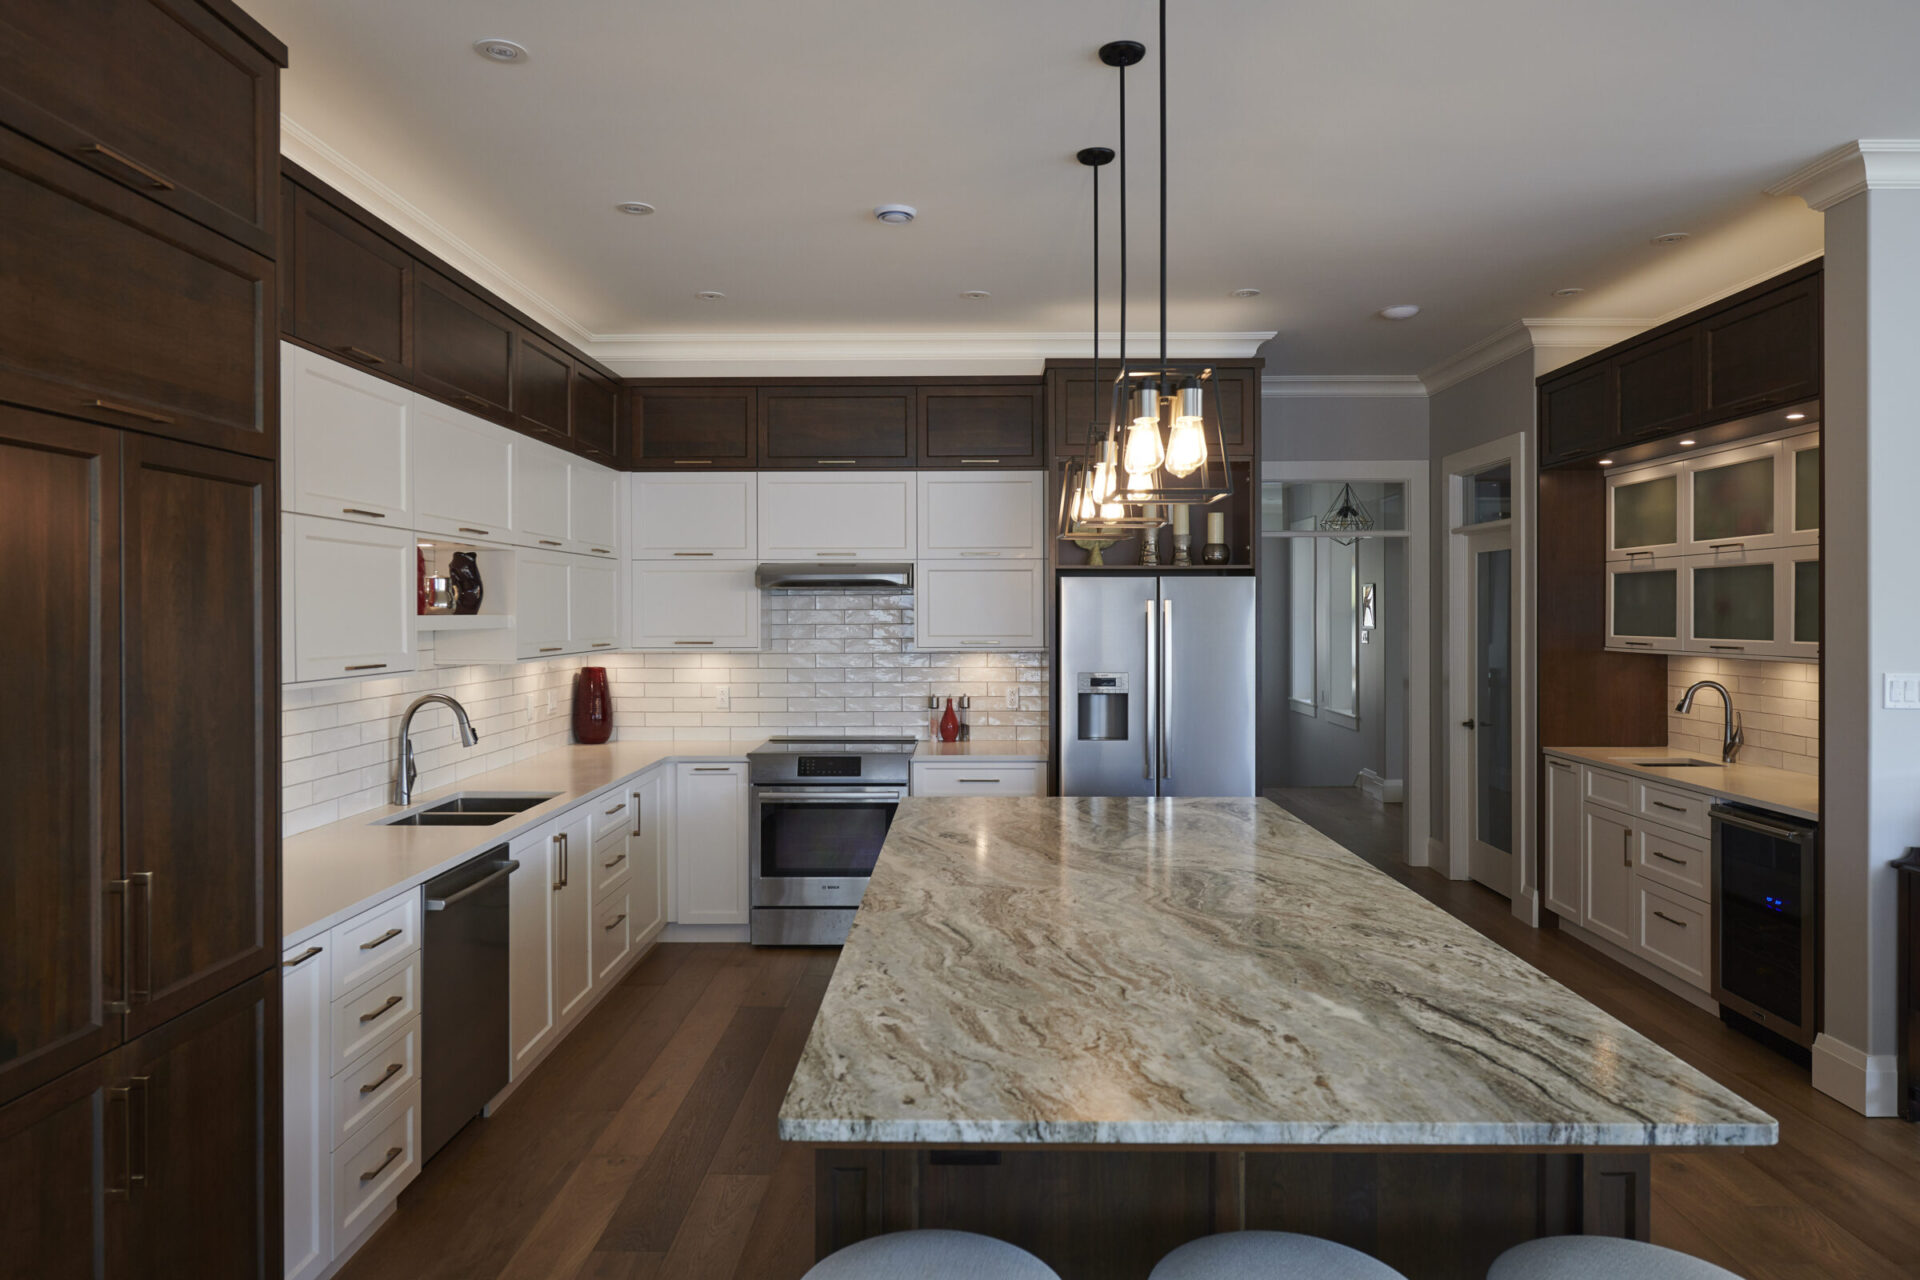 Modern kitchen with white cabinets, dark wood trim, stainless steel appliances, subway tile backsplash, hanging lights, and a large marble-topped island.